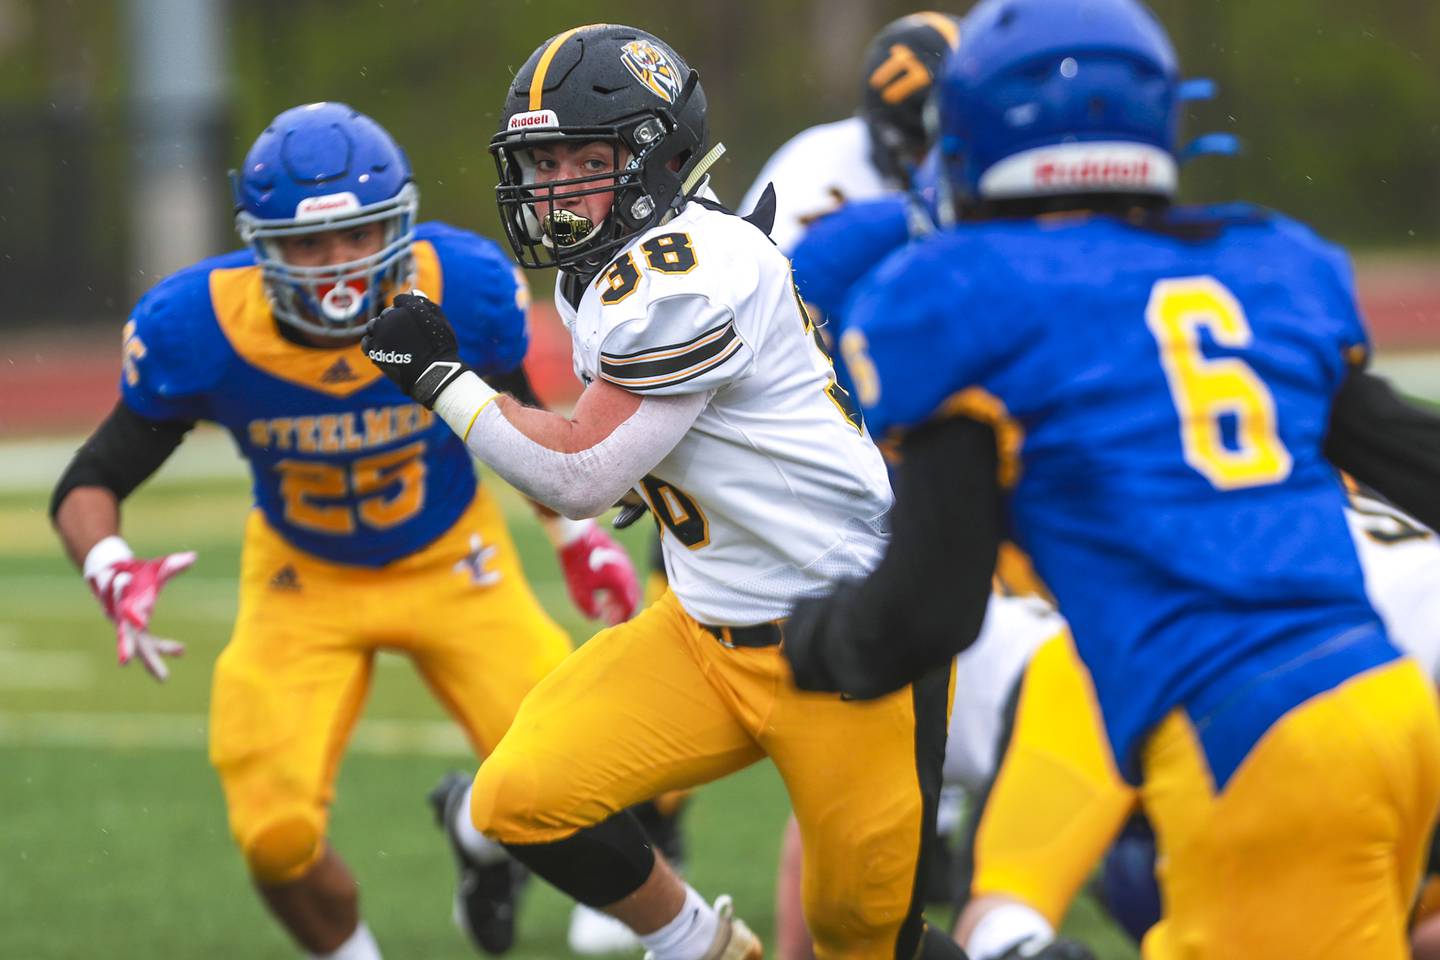 Joliet West running back James Zilinger rushes for a first down on Saturday, April 10, 2021, at Joliet Central High School in Joliet, Ill.